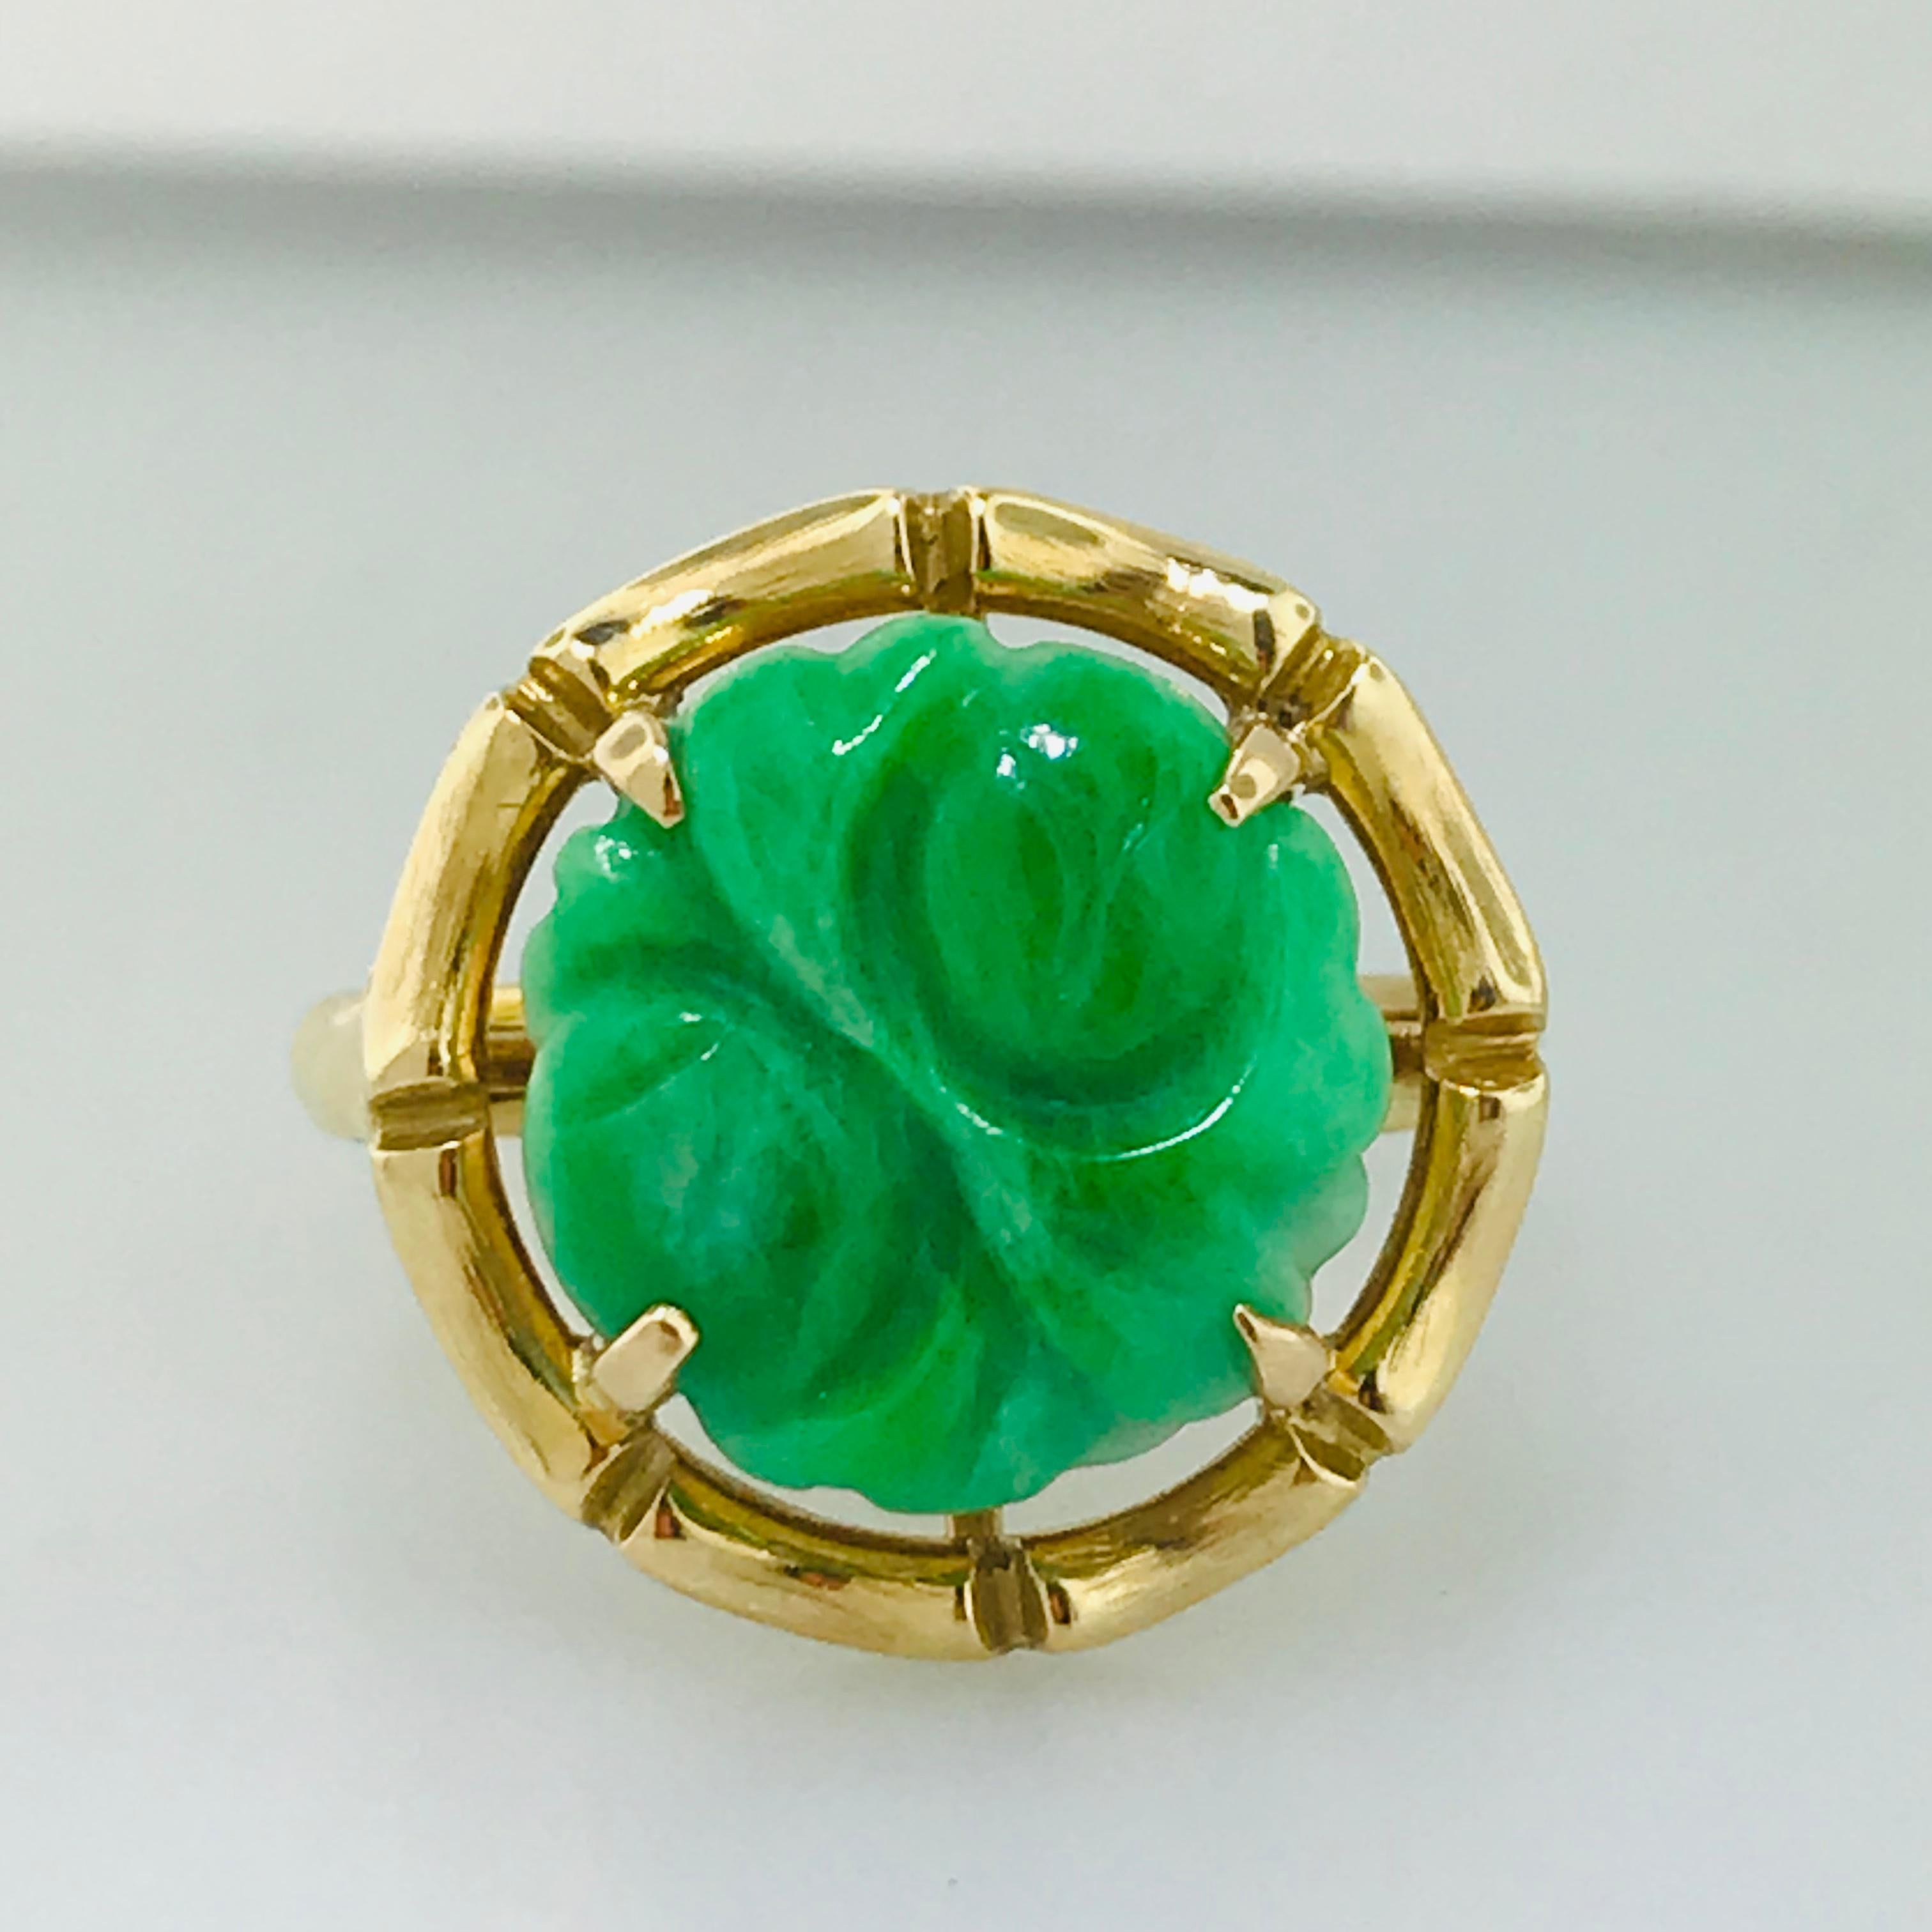 A special vintage jadeite jade piece! Jadeite Jade is the rarest of all jade and the most valuable!

This ring has a hand carved jade piece set in four pointed prongs in a rich 14k yellow gold. The yellow gold compliments the deep green jade color,